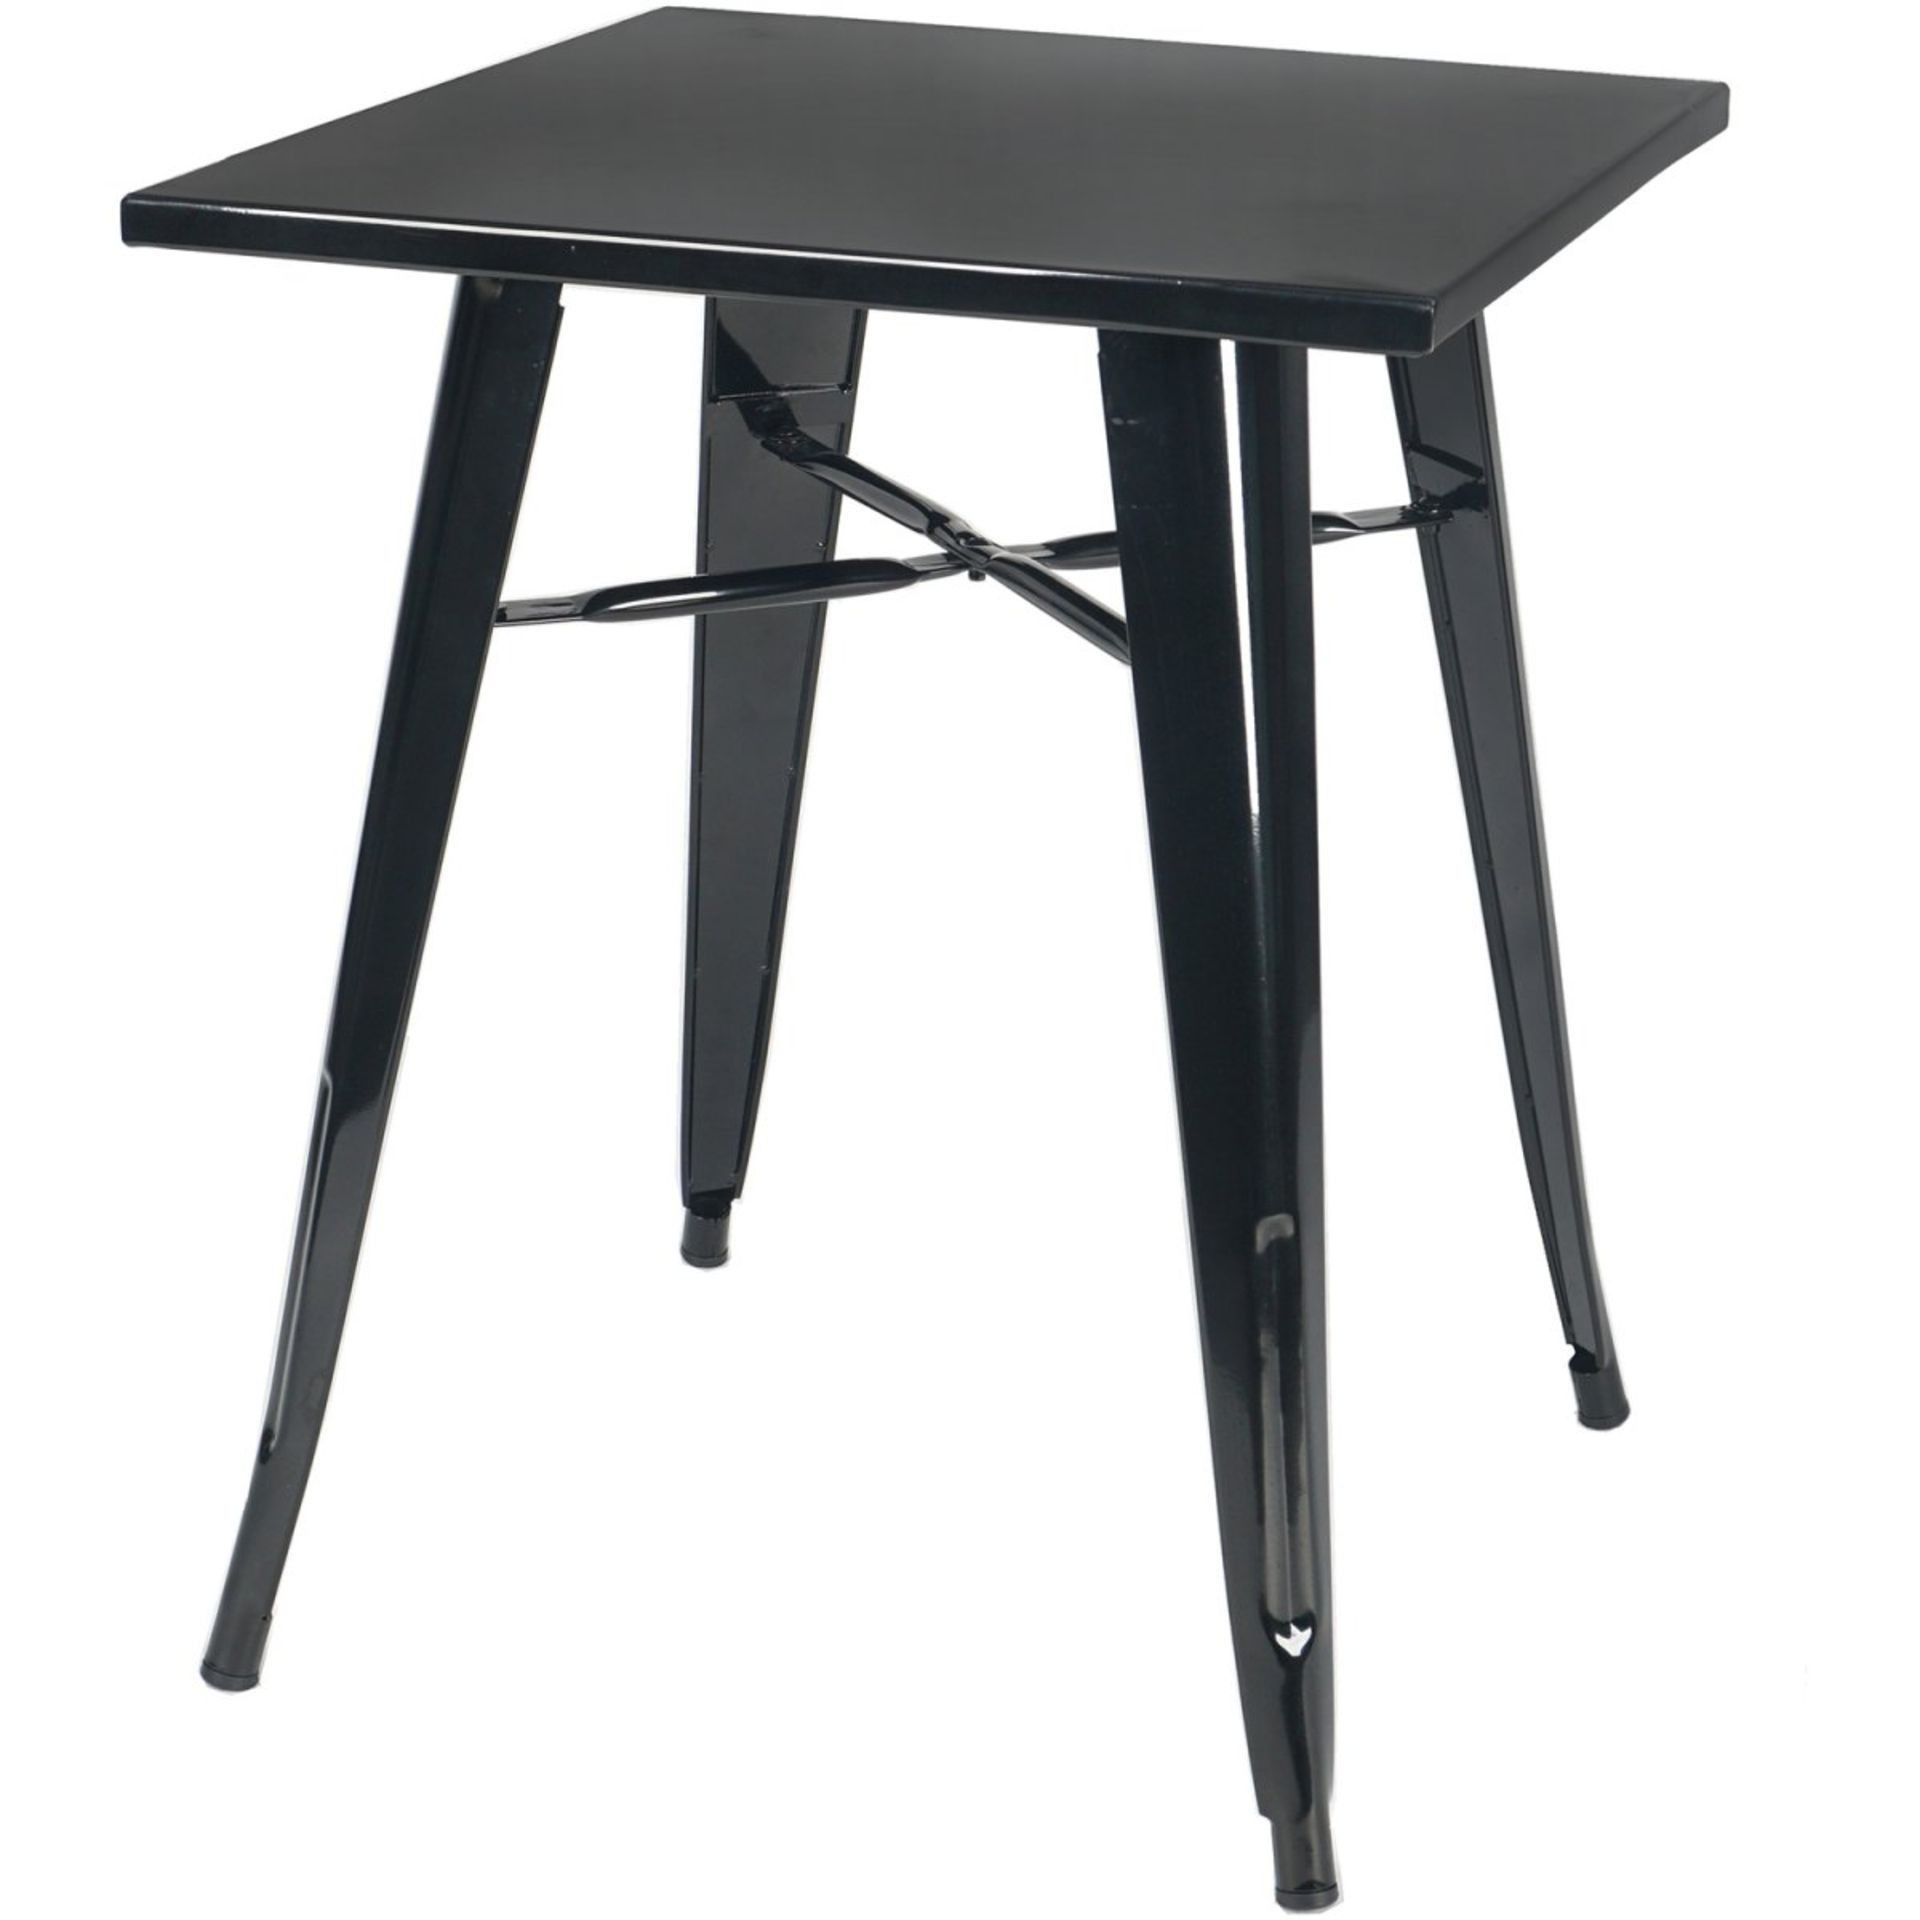 1 x Tolix Industrial Style Outdoor Bistro Table and Chair Set in Black - Includes 1 x Table and 4 - Image 5 of 7